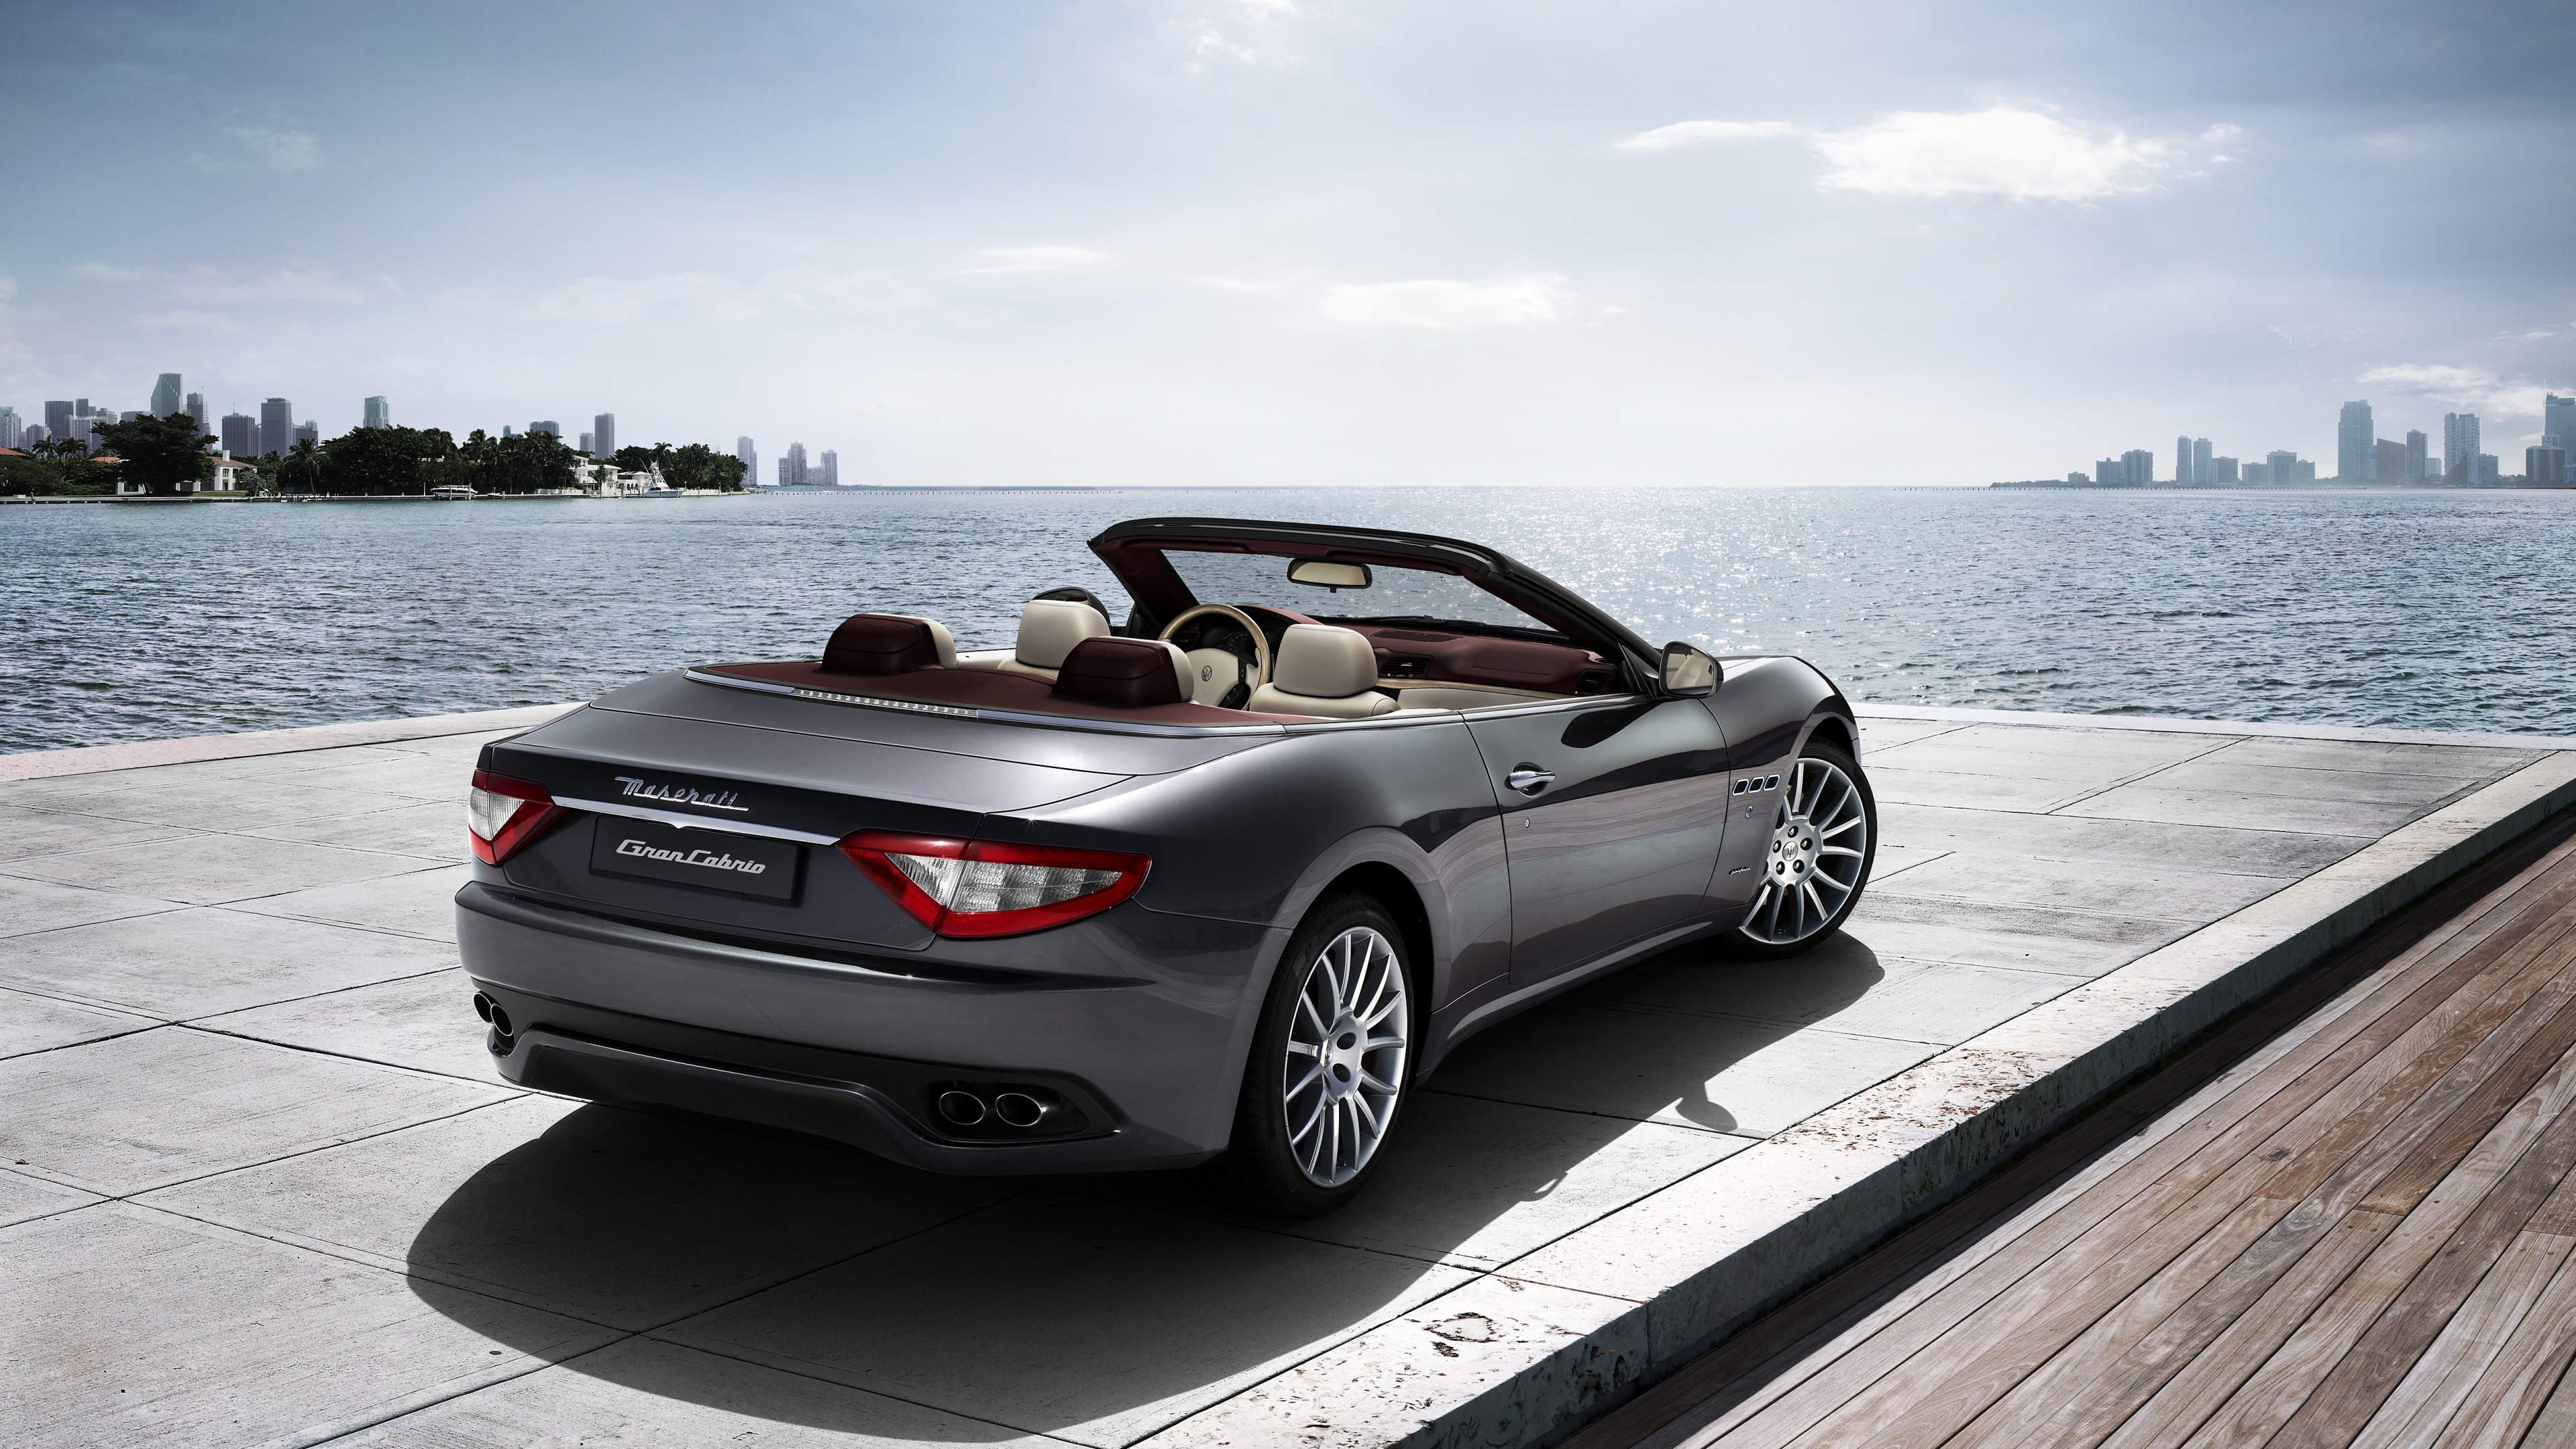 Silver Mercedes Benz Convertible Coupe Parked on Dock During Daytime. Wallpaper in 3840x2160 Resolution